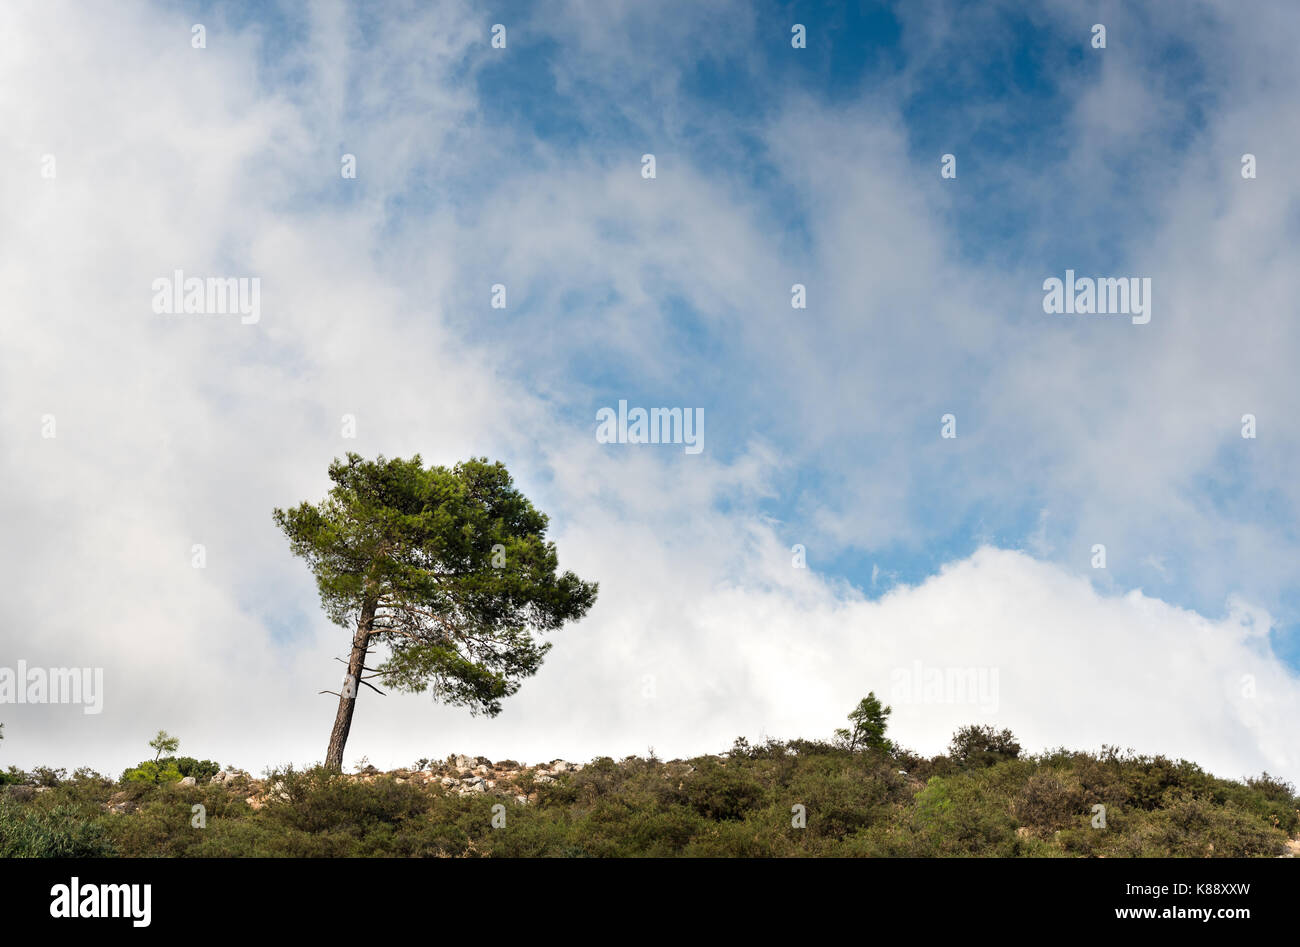 Single lonely pine forest tree standing still at the top of a hill touching  a cloudy sky Stock Photo